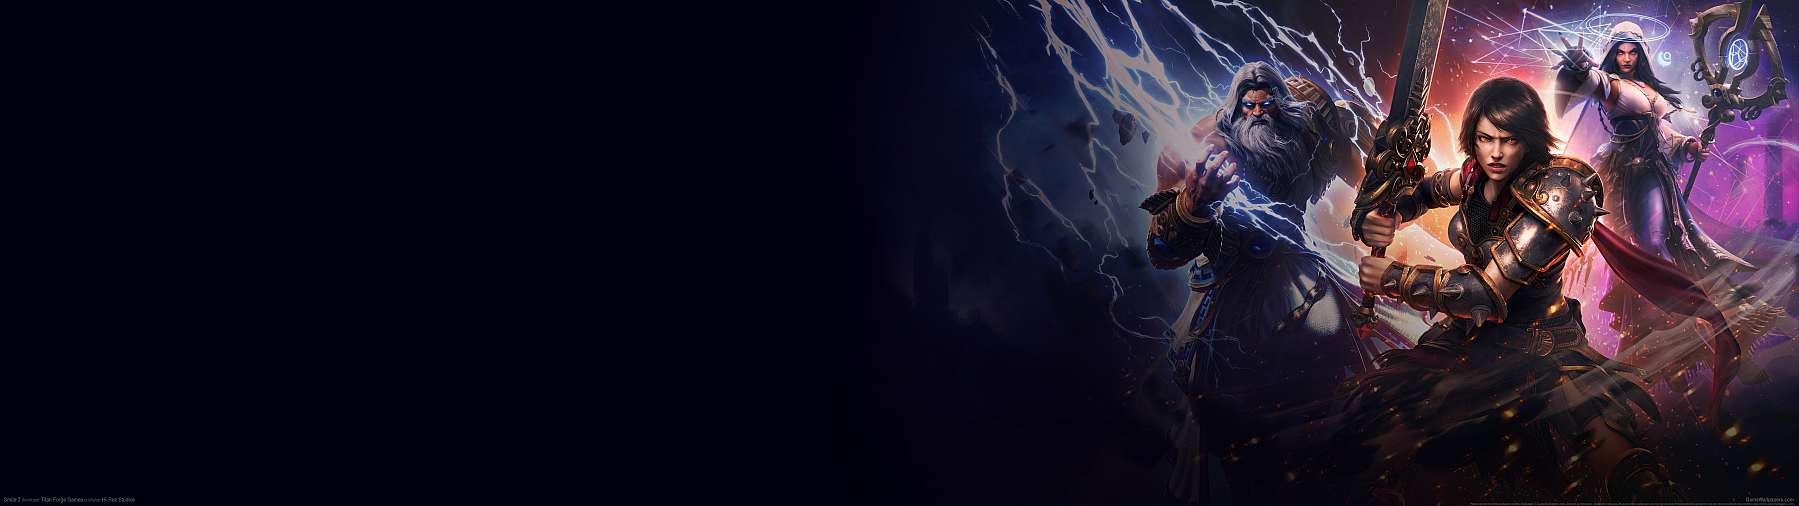 Smite 2 superwide wallpaper or background 01